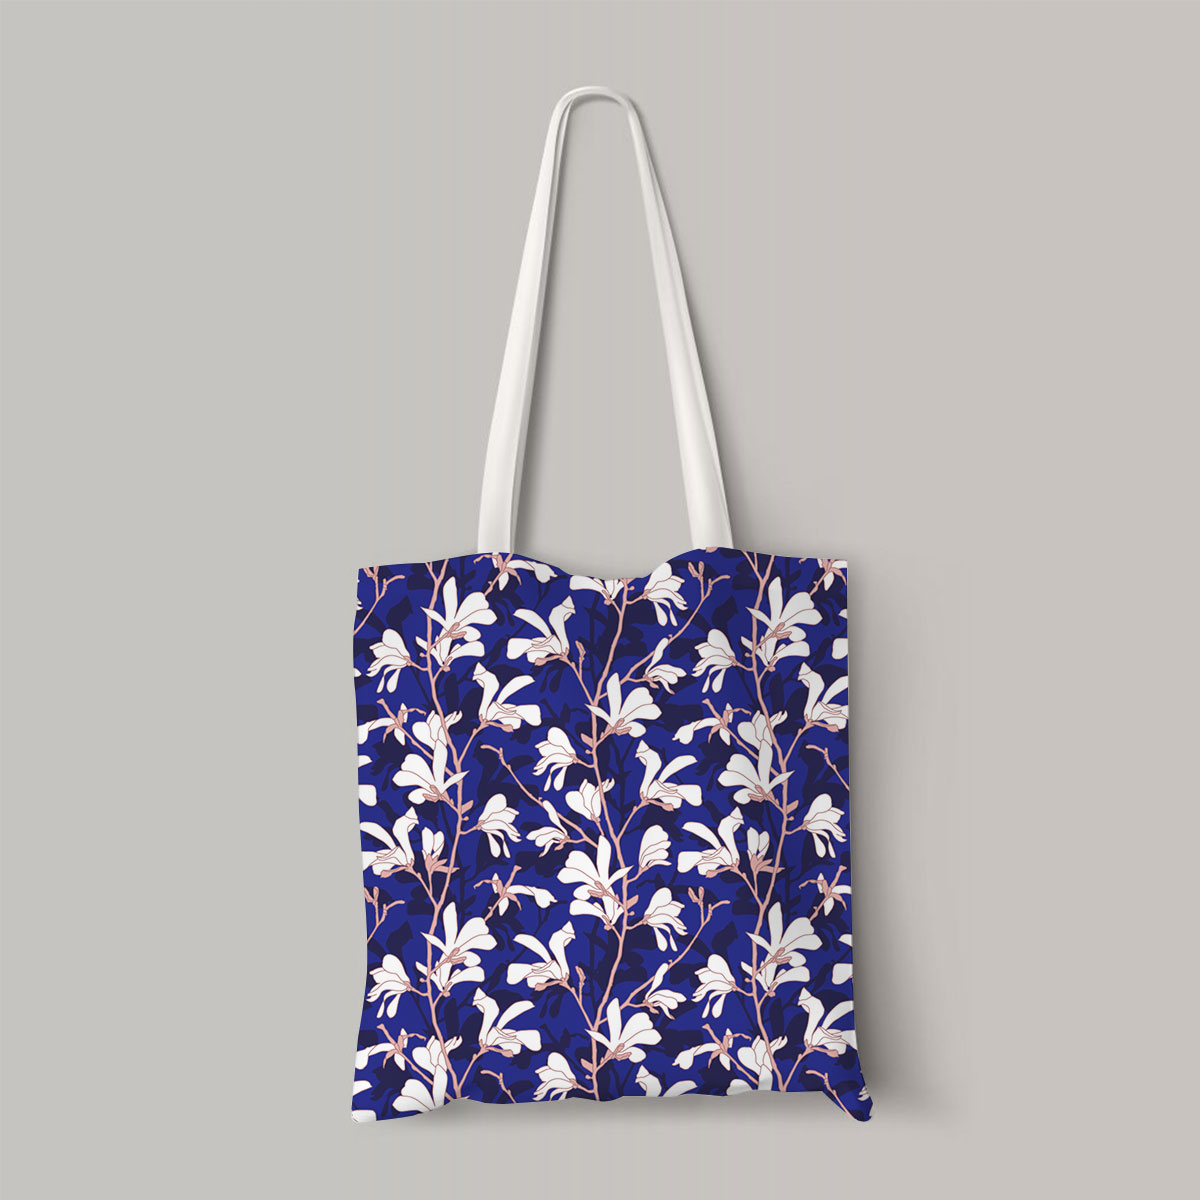 Blue Floral Background With White Magnolia Flower Totebag